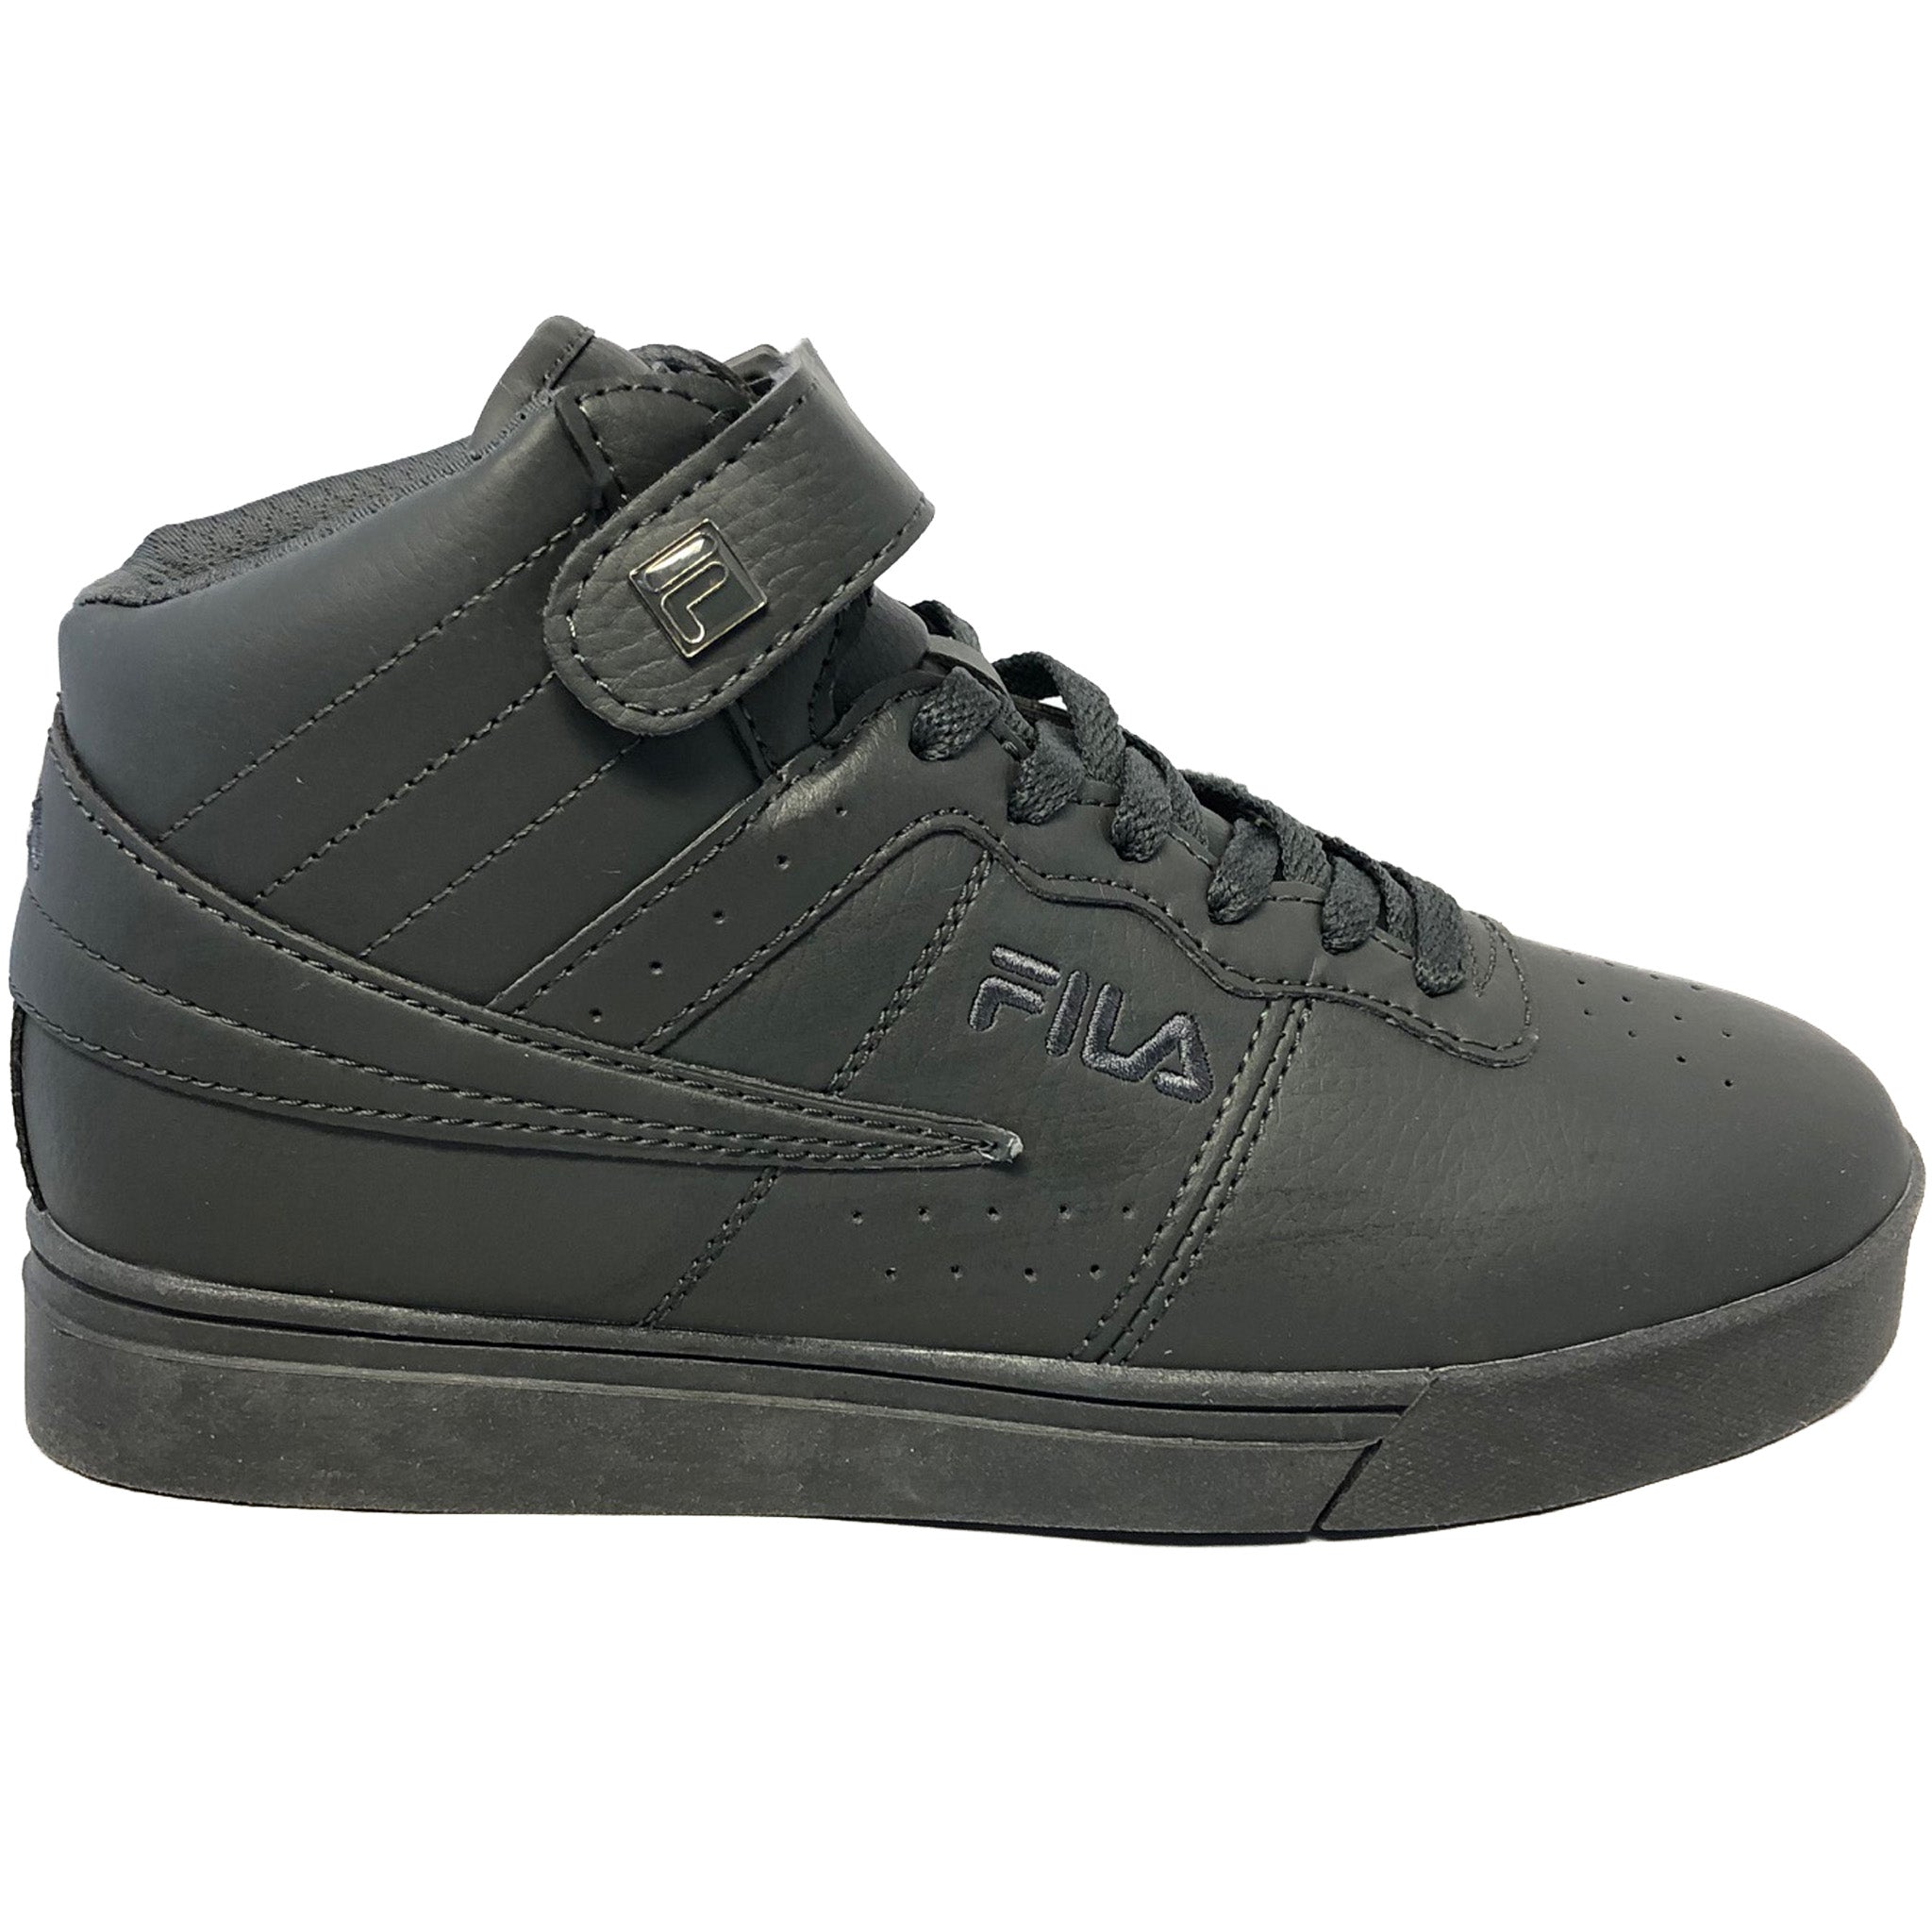 Kammer Pakistan dato Fila Mens Vulc 13 MP Mid Plus Tonal Casual Shoes – That Shoe Store and More